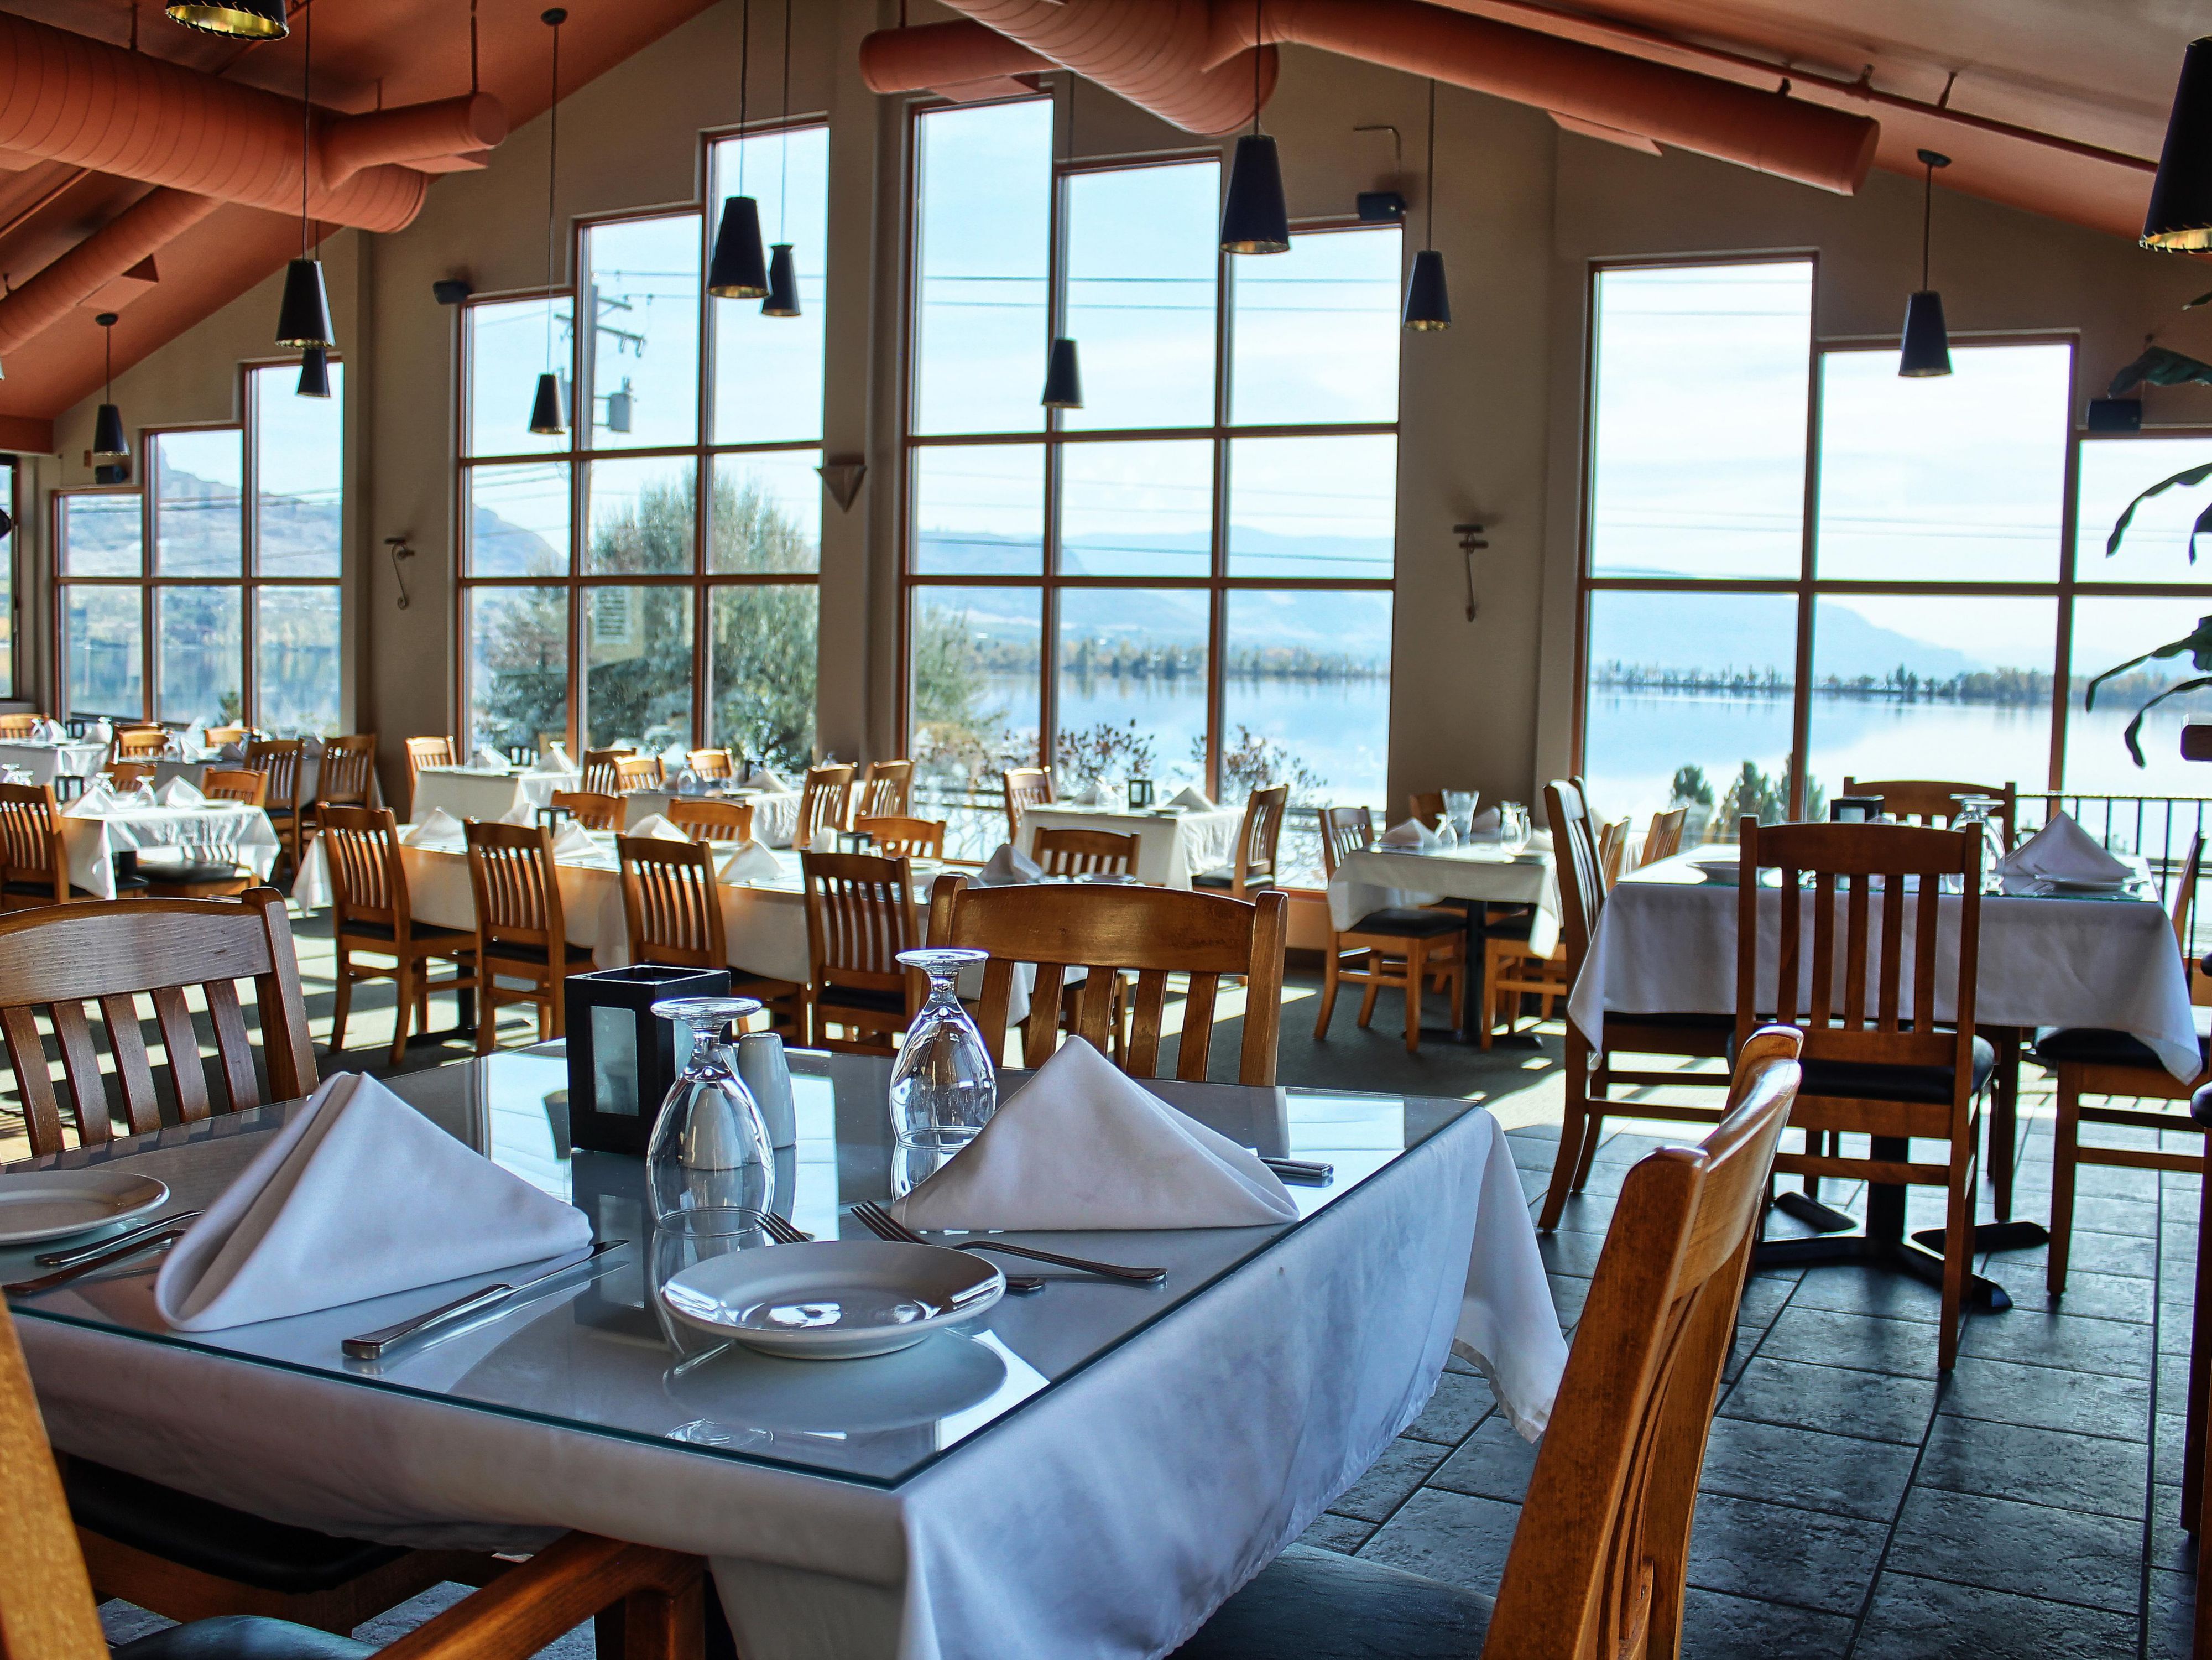 Located on the second floor of the Holiday Inn and Suites Osoyoos, BC, the restaurant overlooks the stunning views of Osoyoos Lake.  This fabulous restaurant and lounge features a creative, fresh menu with an extensive wine list.